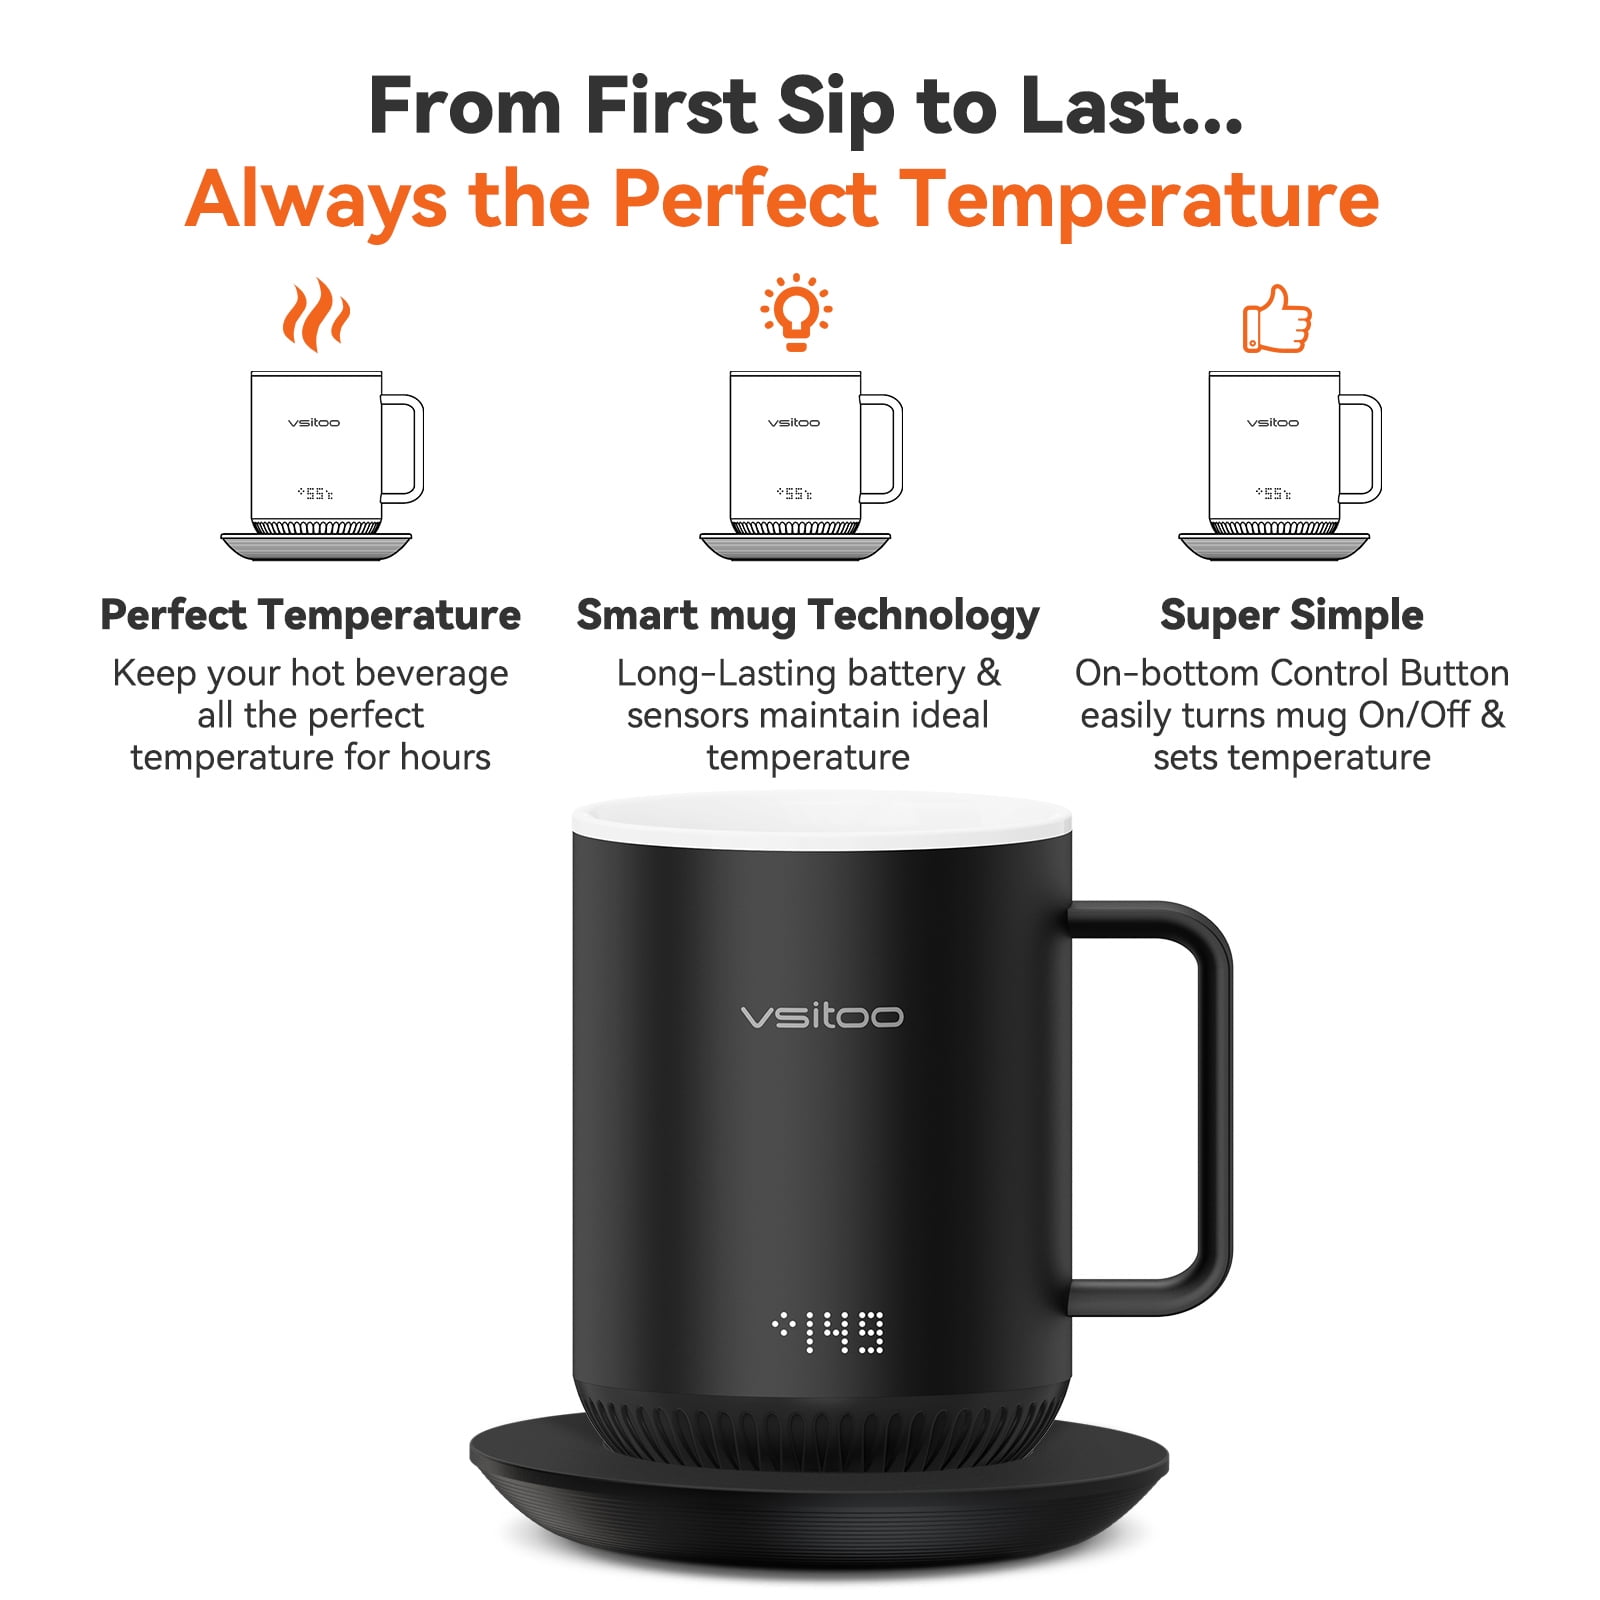 The Ember Travel Mug can keep your drink at the perfect